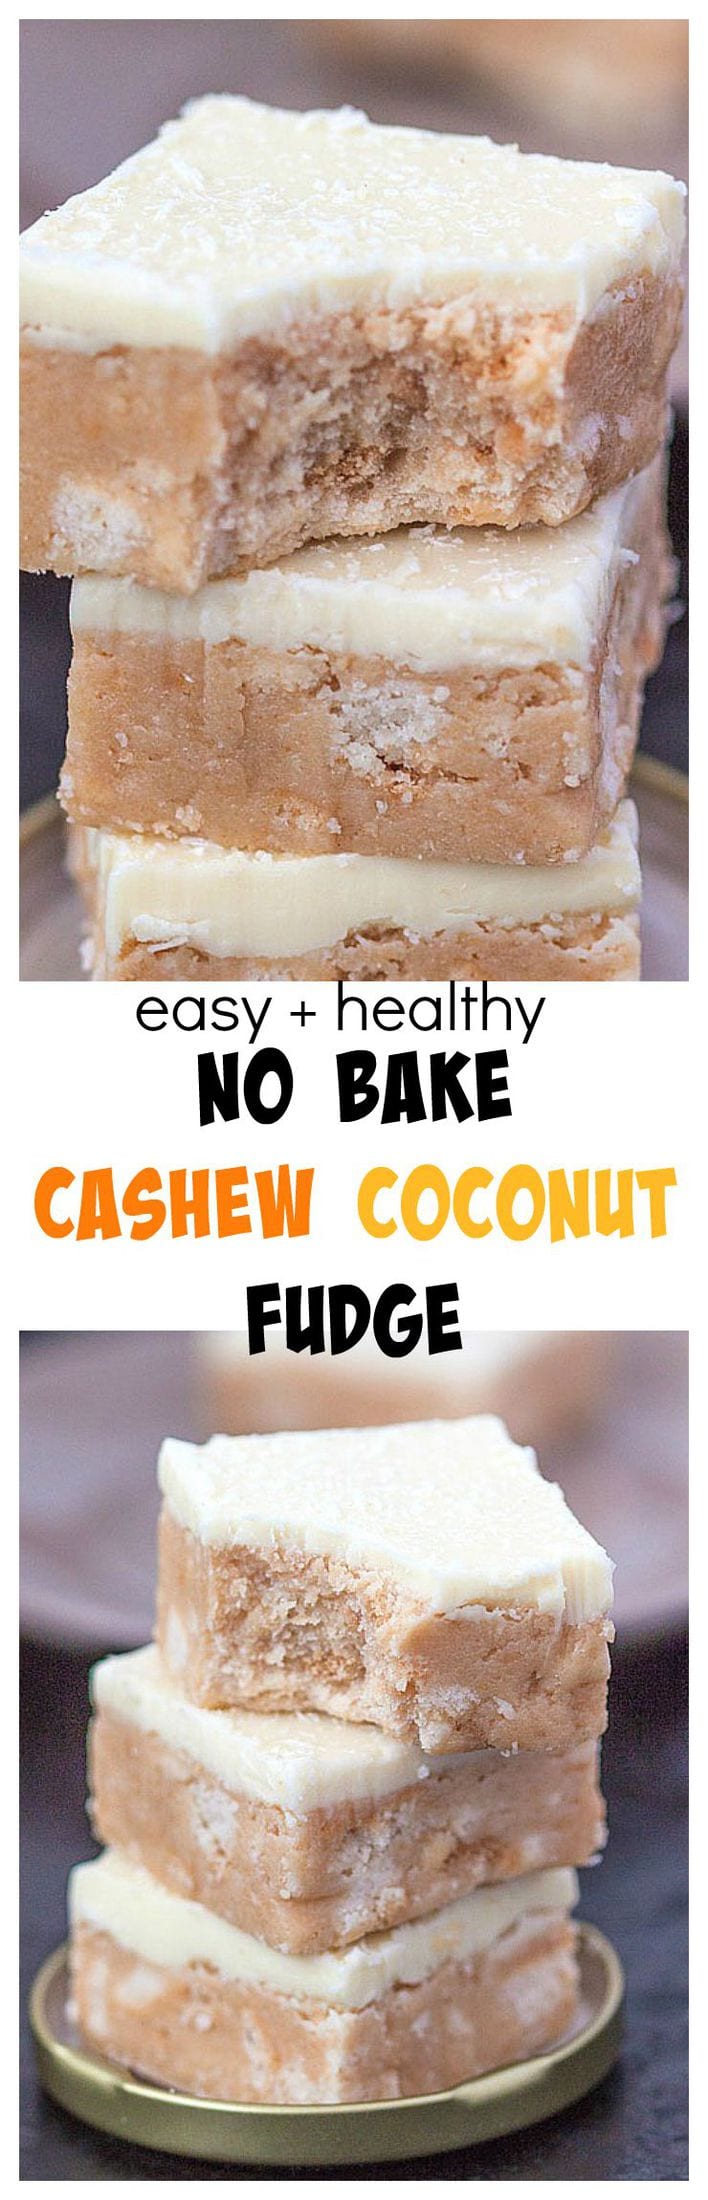 Easy and Healthy No Bake Cashew Coconut Fudge- Delicious, melt in your mouth dessert or snack which takes minutes to whip up- Paleo, vegan and high protein option!